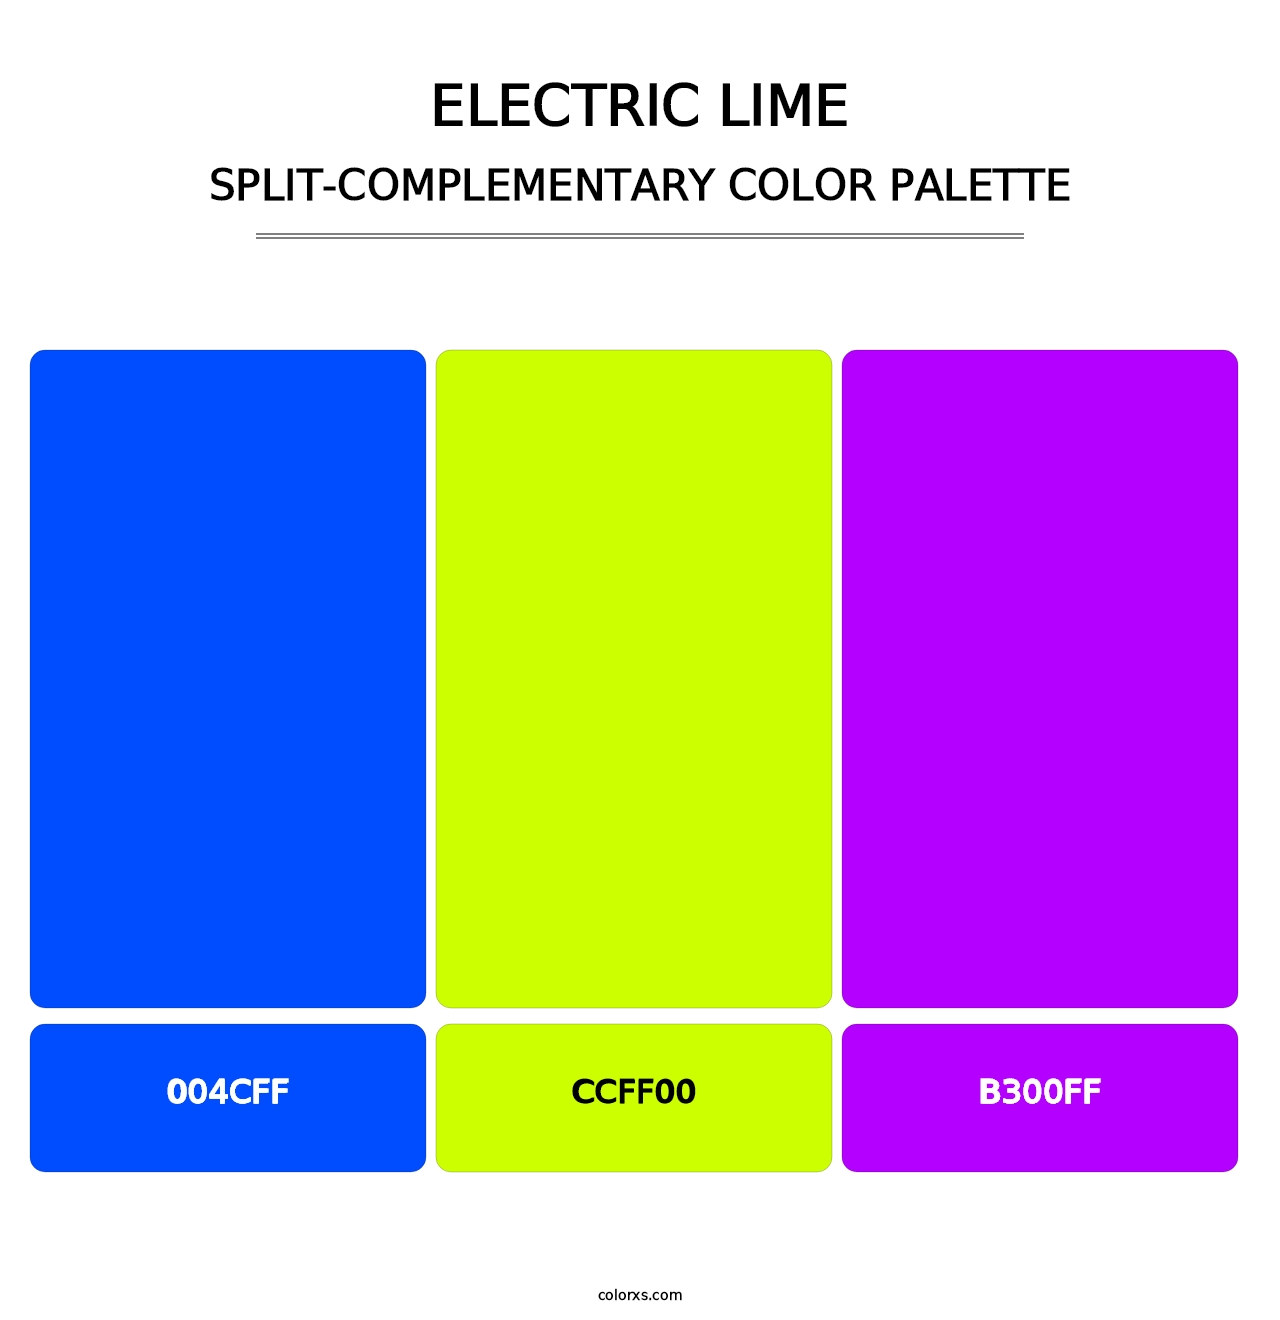 Electric Lime - Split-Complementary Color Palette